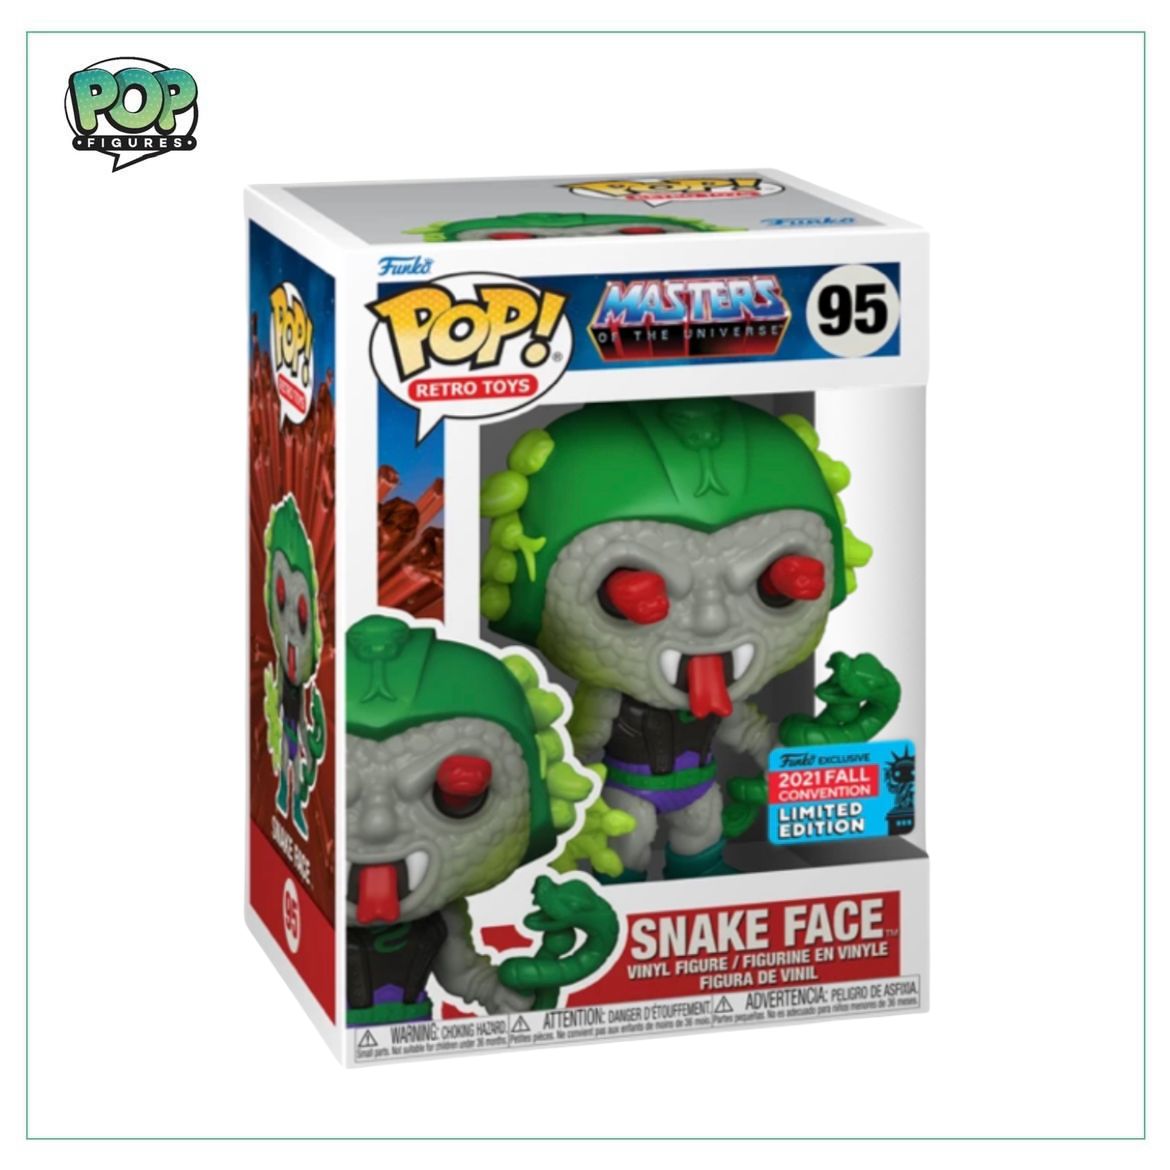 Snake Face #95 Funko Pop! Masters of the Universe, 2021 NYCC Shared Exclusive